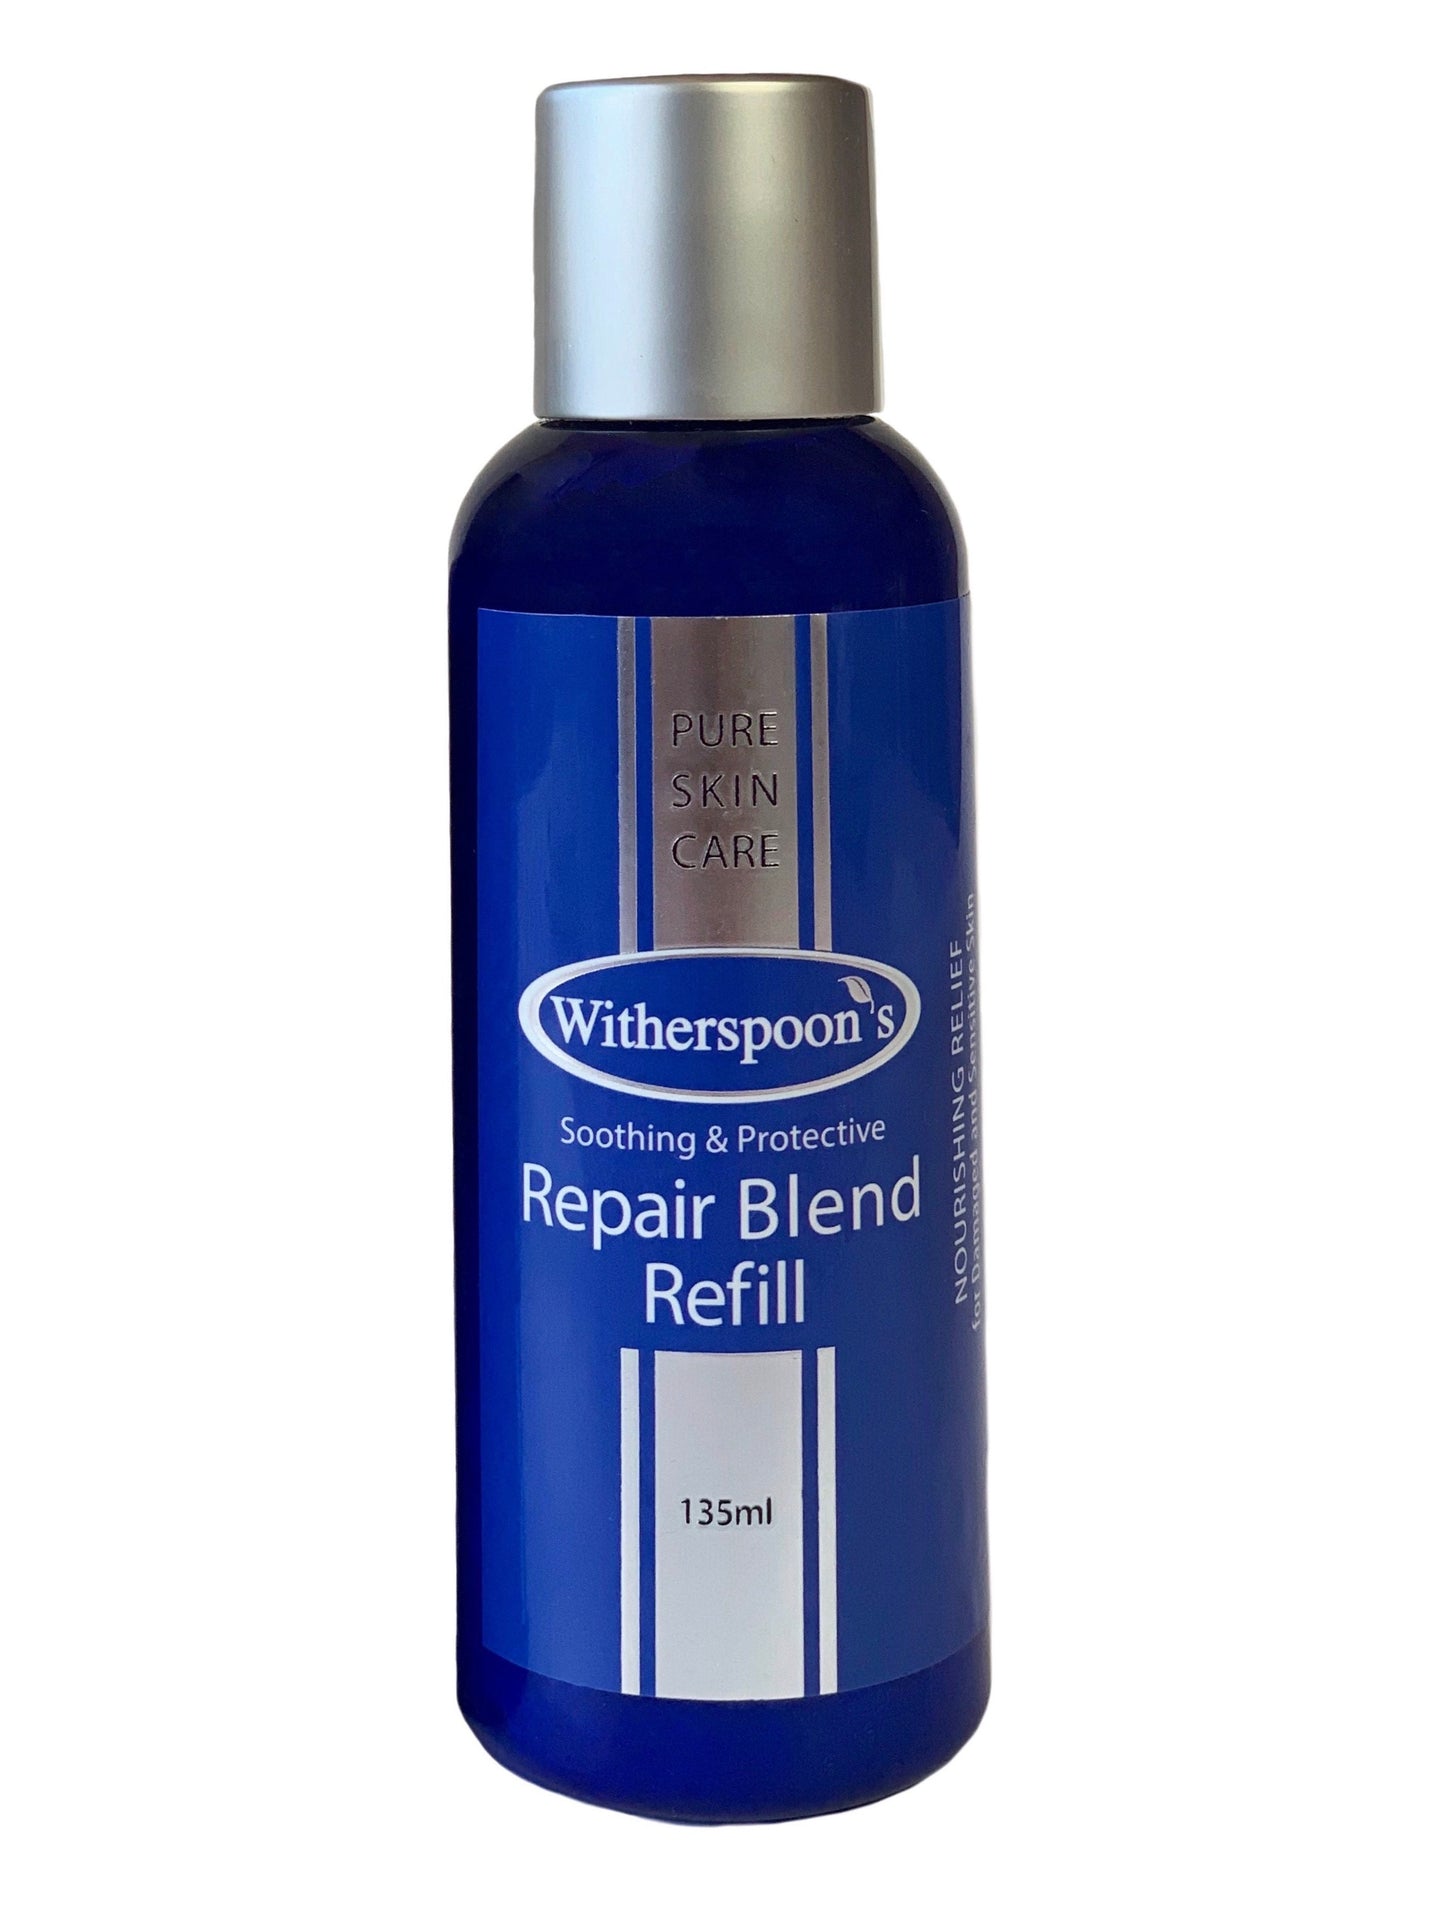 Witherspoons Repair Blend Refill 135ml Bottle with flip top lid. Can be used on rashes, eczema, dermatitis, cuts, scrapes, bruises, swelling, insect bites, stitches, sores of all kinds, acne, chapped or cracked skin. It may also be added to clean dressings or as a natural substitute for Cortisone creams.